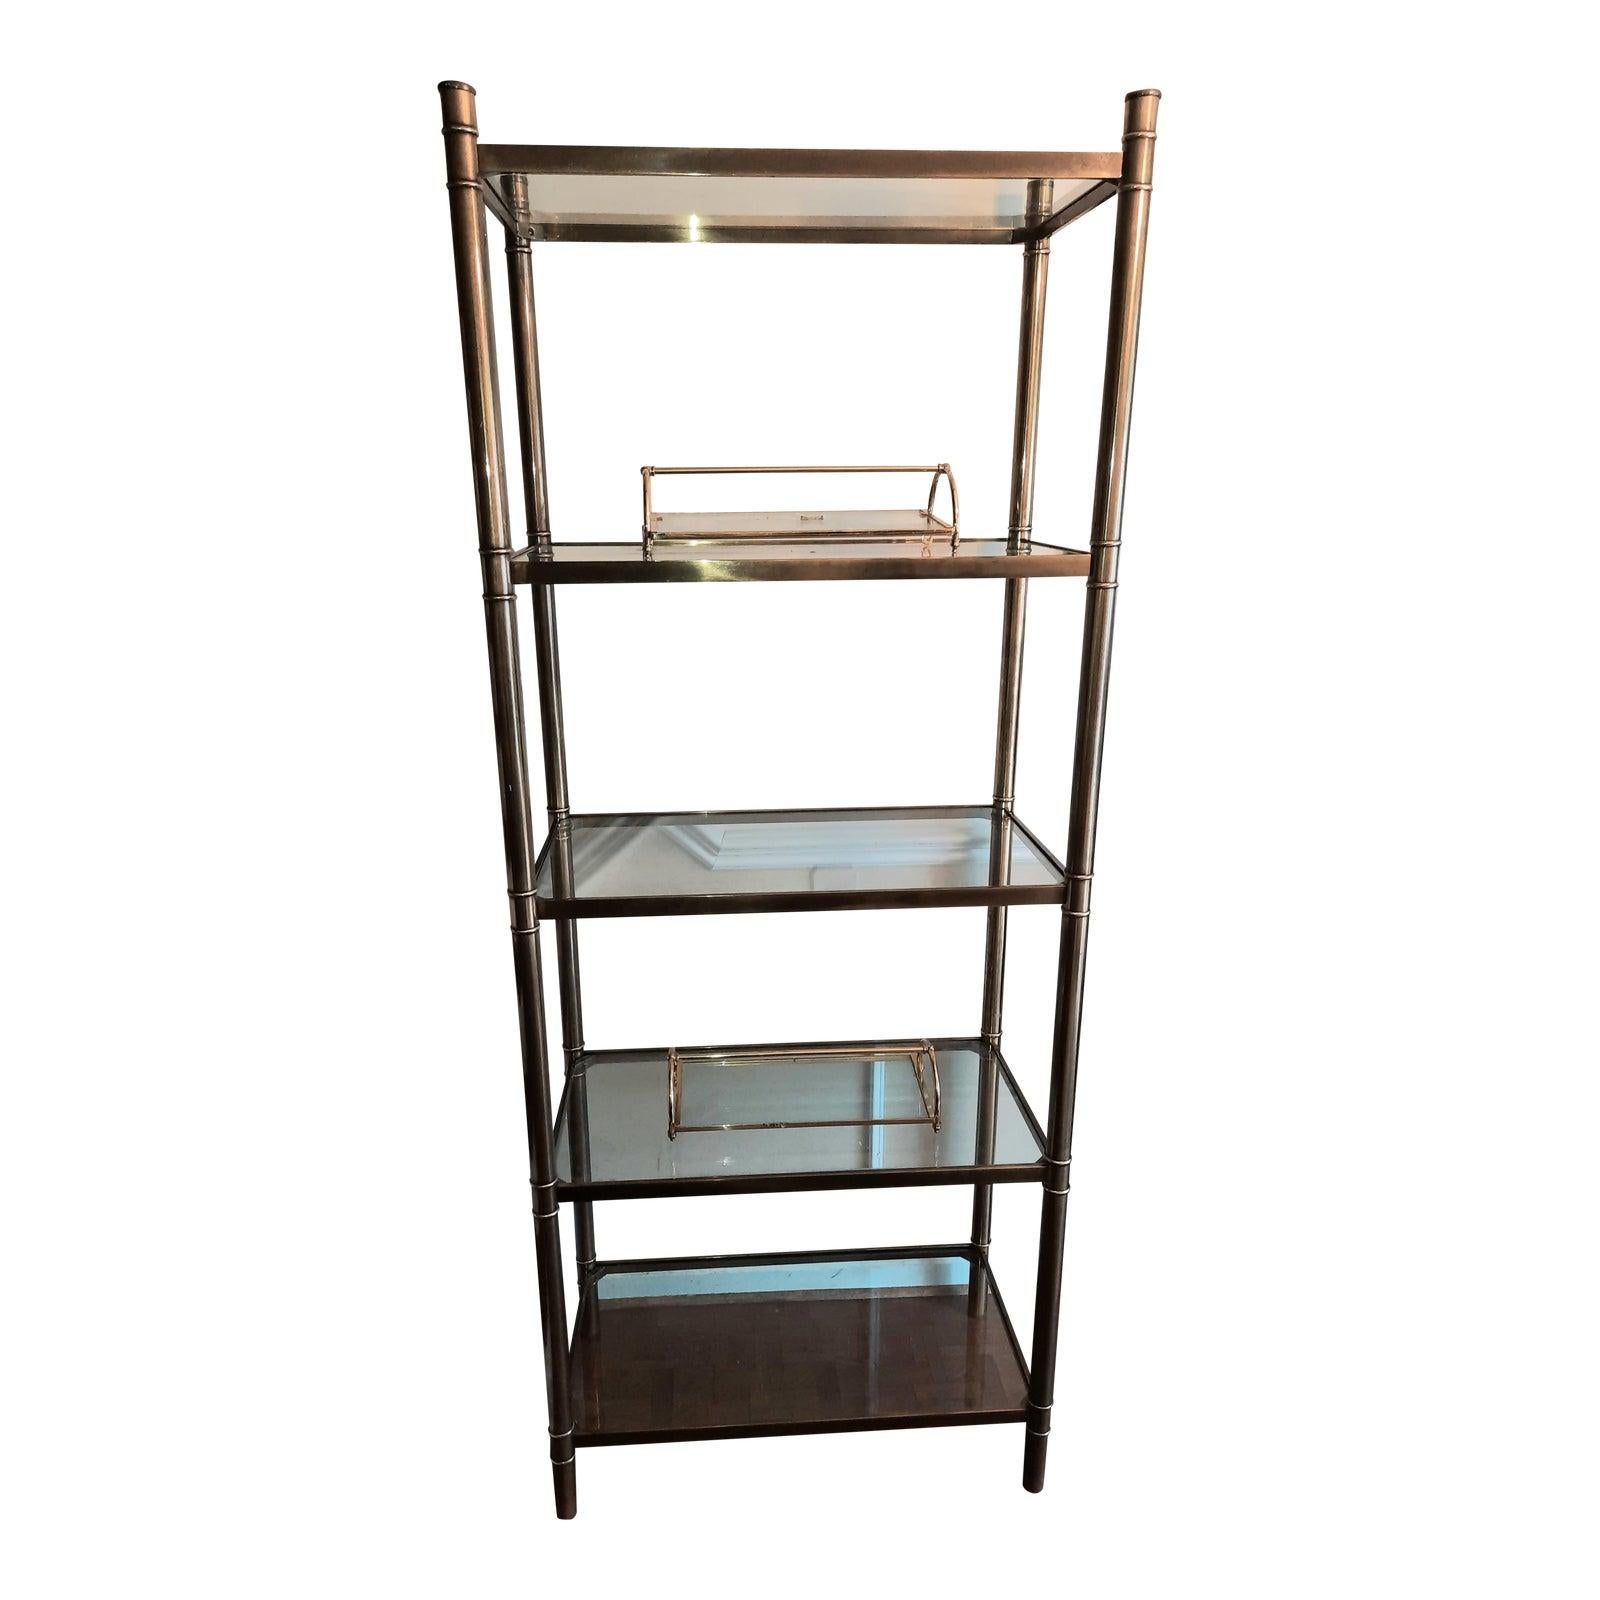 1960s Regency Style Vintage Solid Brass Etagere with Glass Shelves